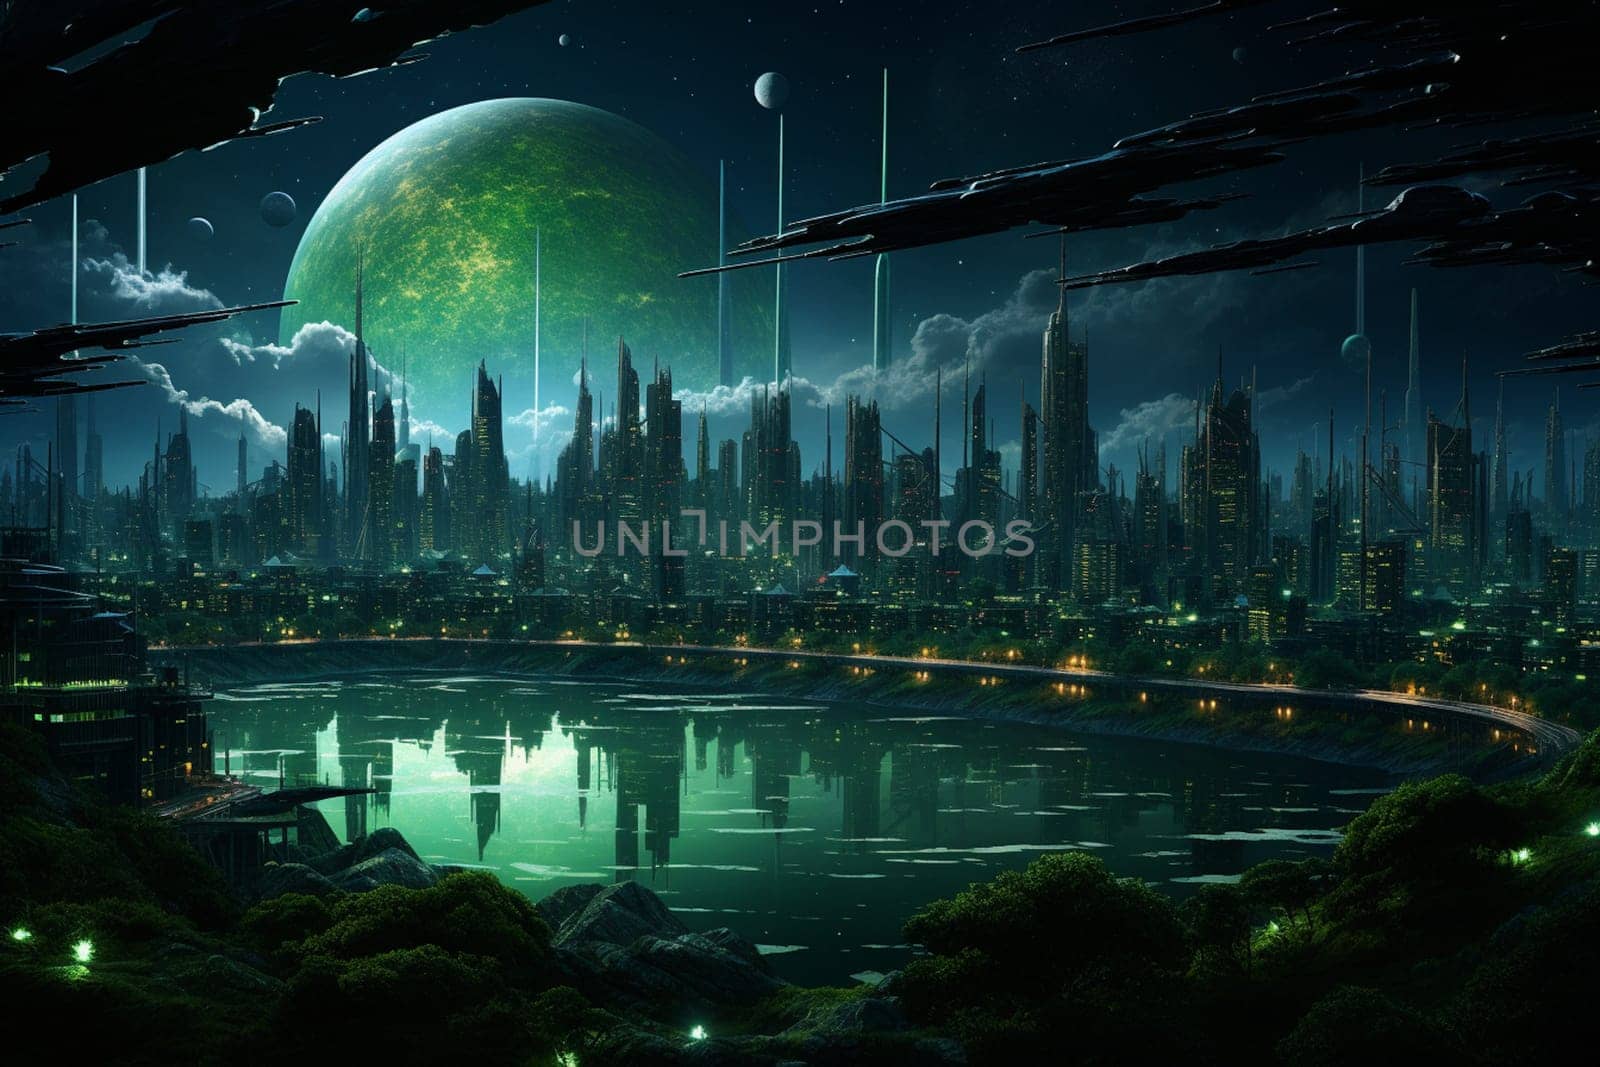 view of the futuristic city on alien planet, digital painting, concept illustration by Andelov13